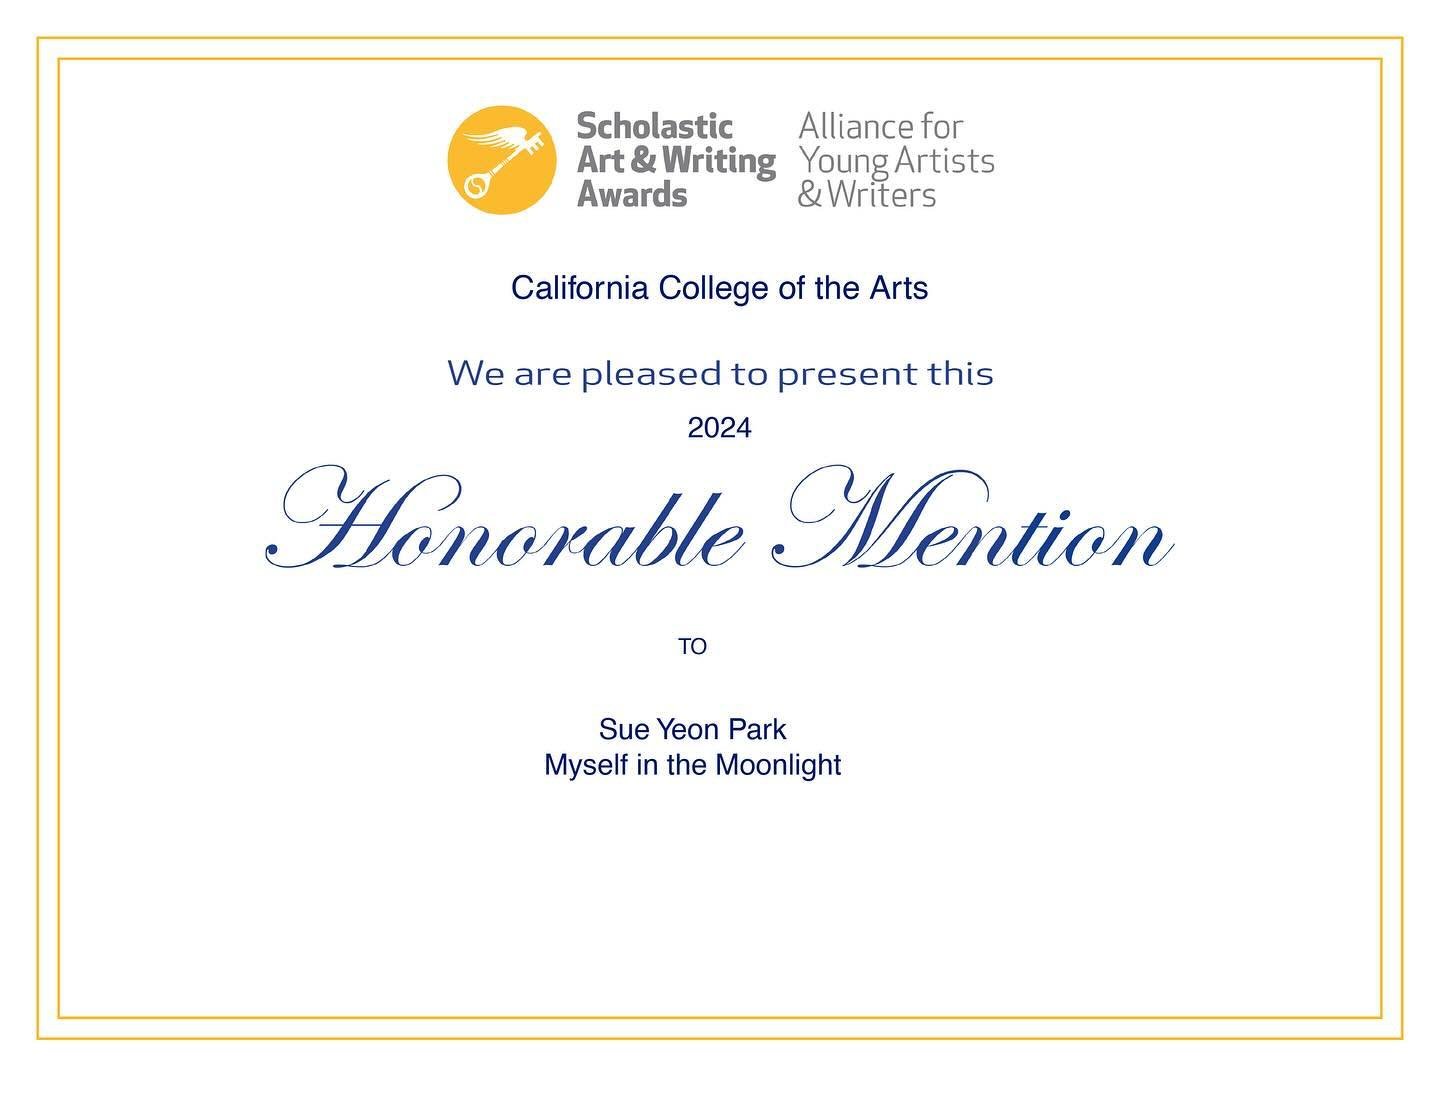 2024 Scholastic Art Awards WINNERS are here! 👏 🎉
Congratulations Sue Yeon for winning the Honorable Mention this year! 
You are one amazing young artist 🧑&zwj;🎨🩵!!!